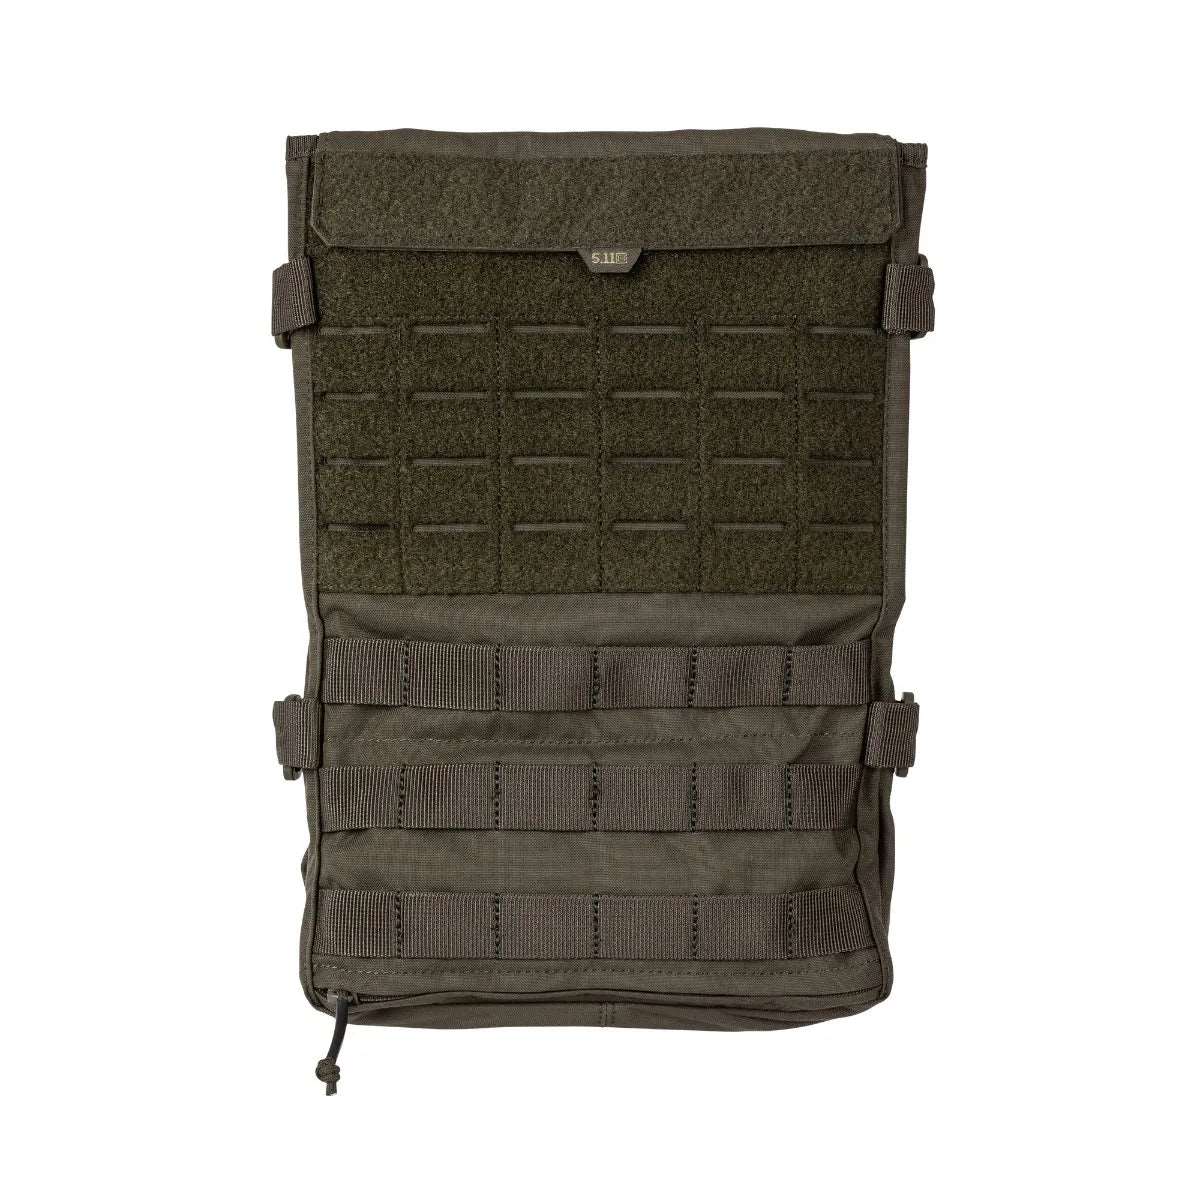 Hydration Packs - 5.11 Tactical PC Convertible Hydration Carrier